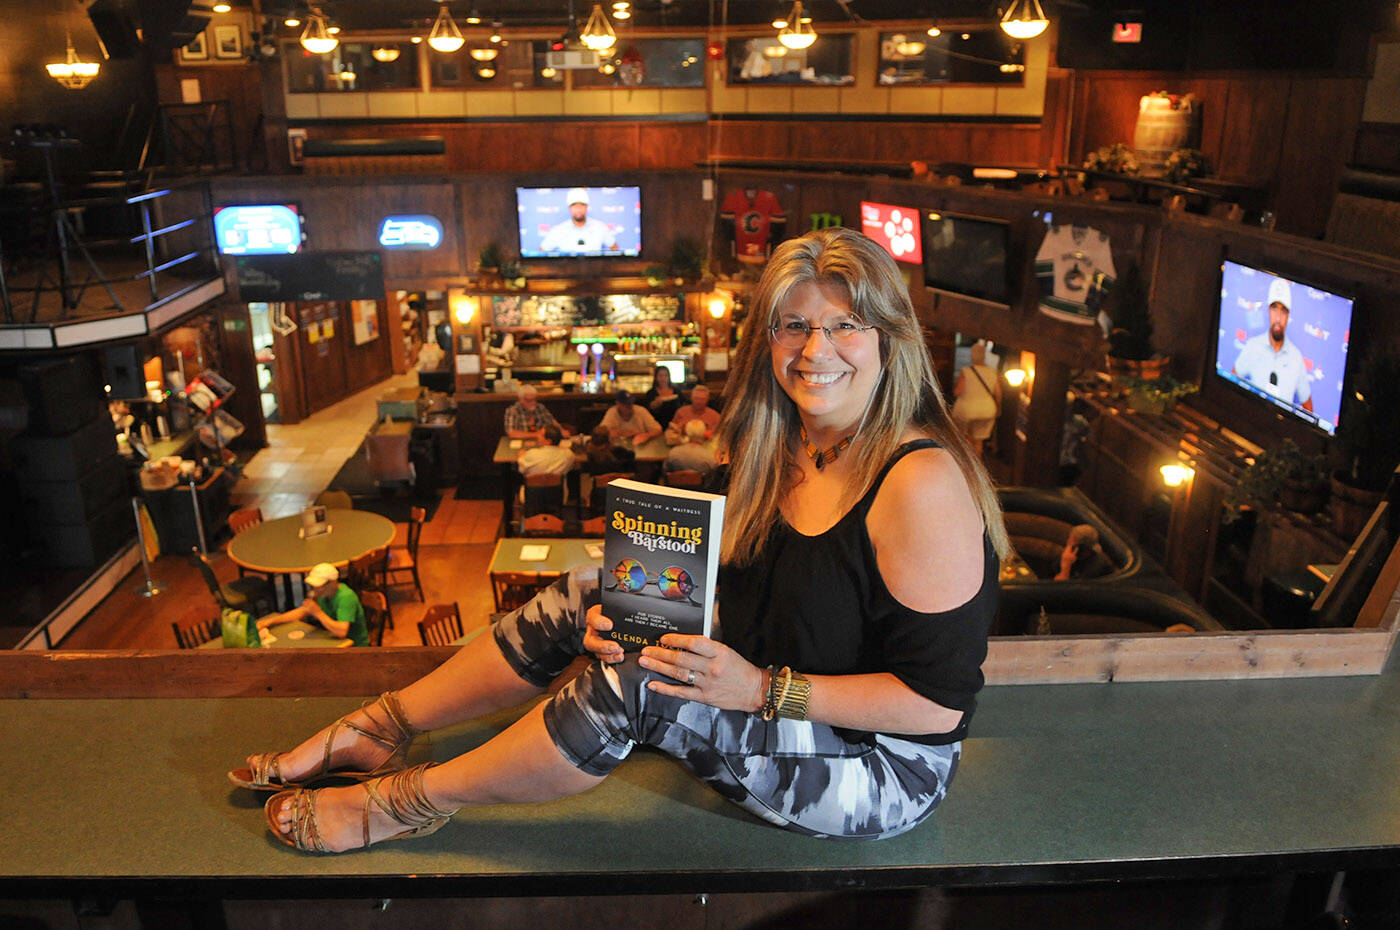 Glenda Toews, seen here at Corky’s Irish Pub in Chilliwack, wrote ‘Spinning on a Barstool’ after she was allegedly scammed $60,000 by a con artist. (Jenna Hauck/ Chilliwack Progress)